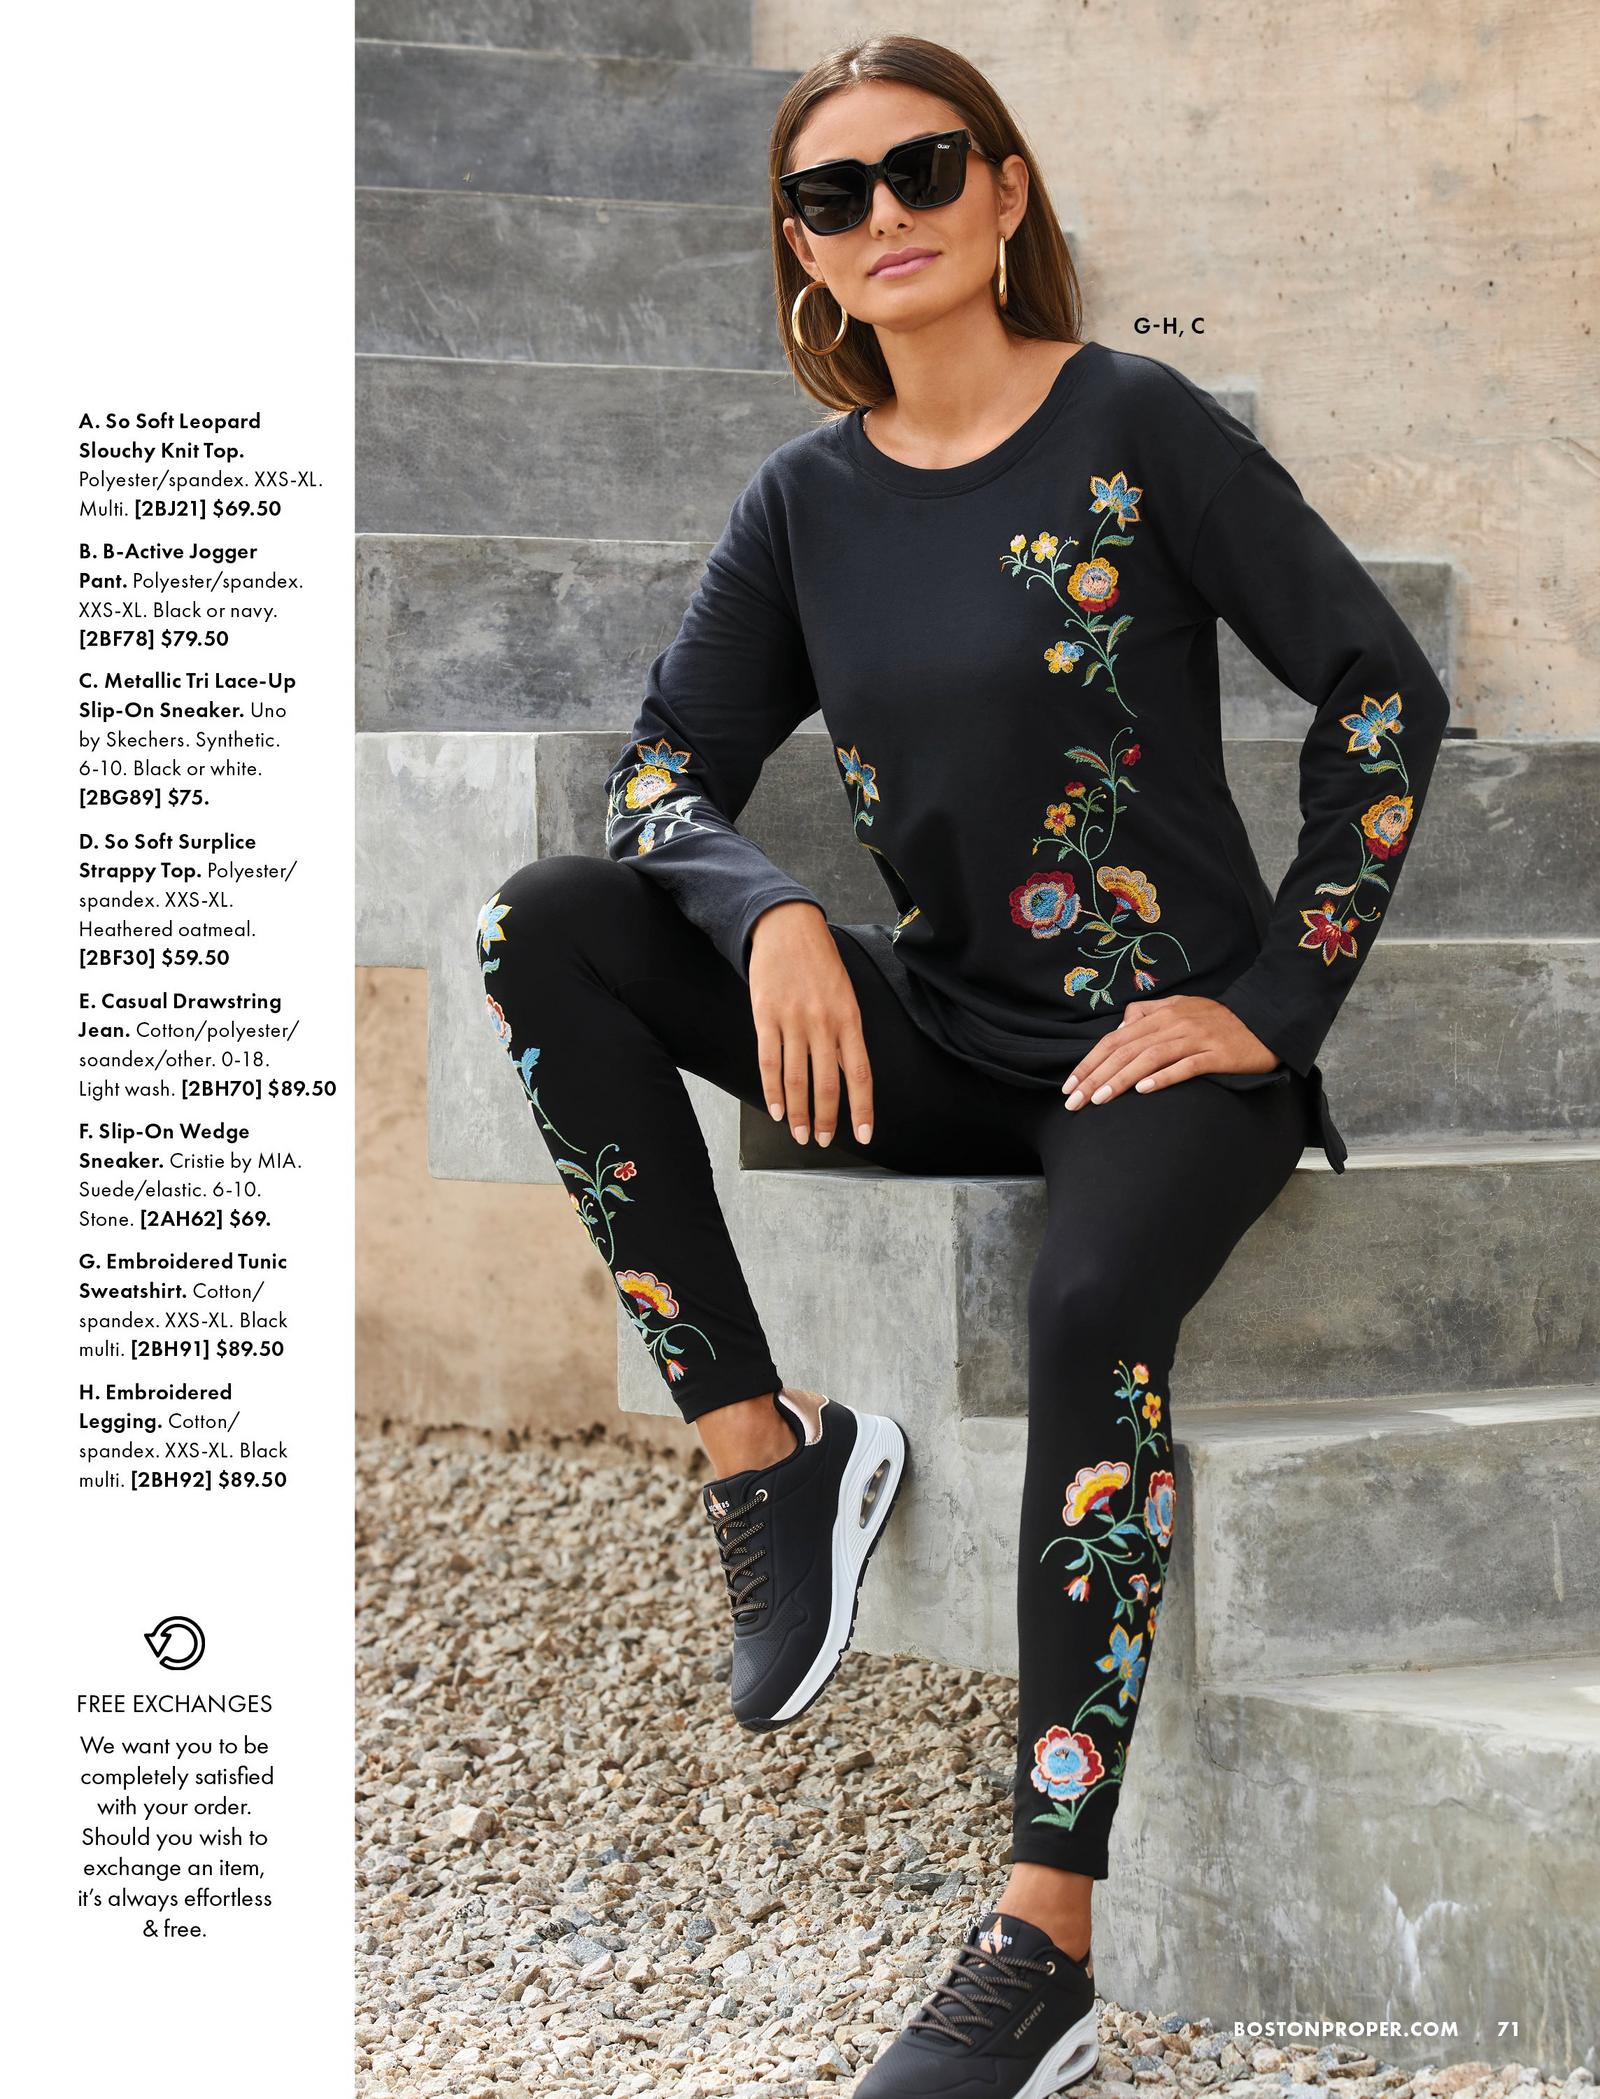 model wearing a black floral embroidered sweatshirt, black floral embroidered leggings, black sneakers, gold hoop earrings, and sunglasses.